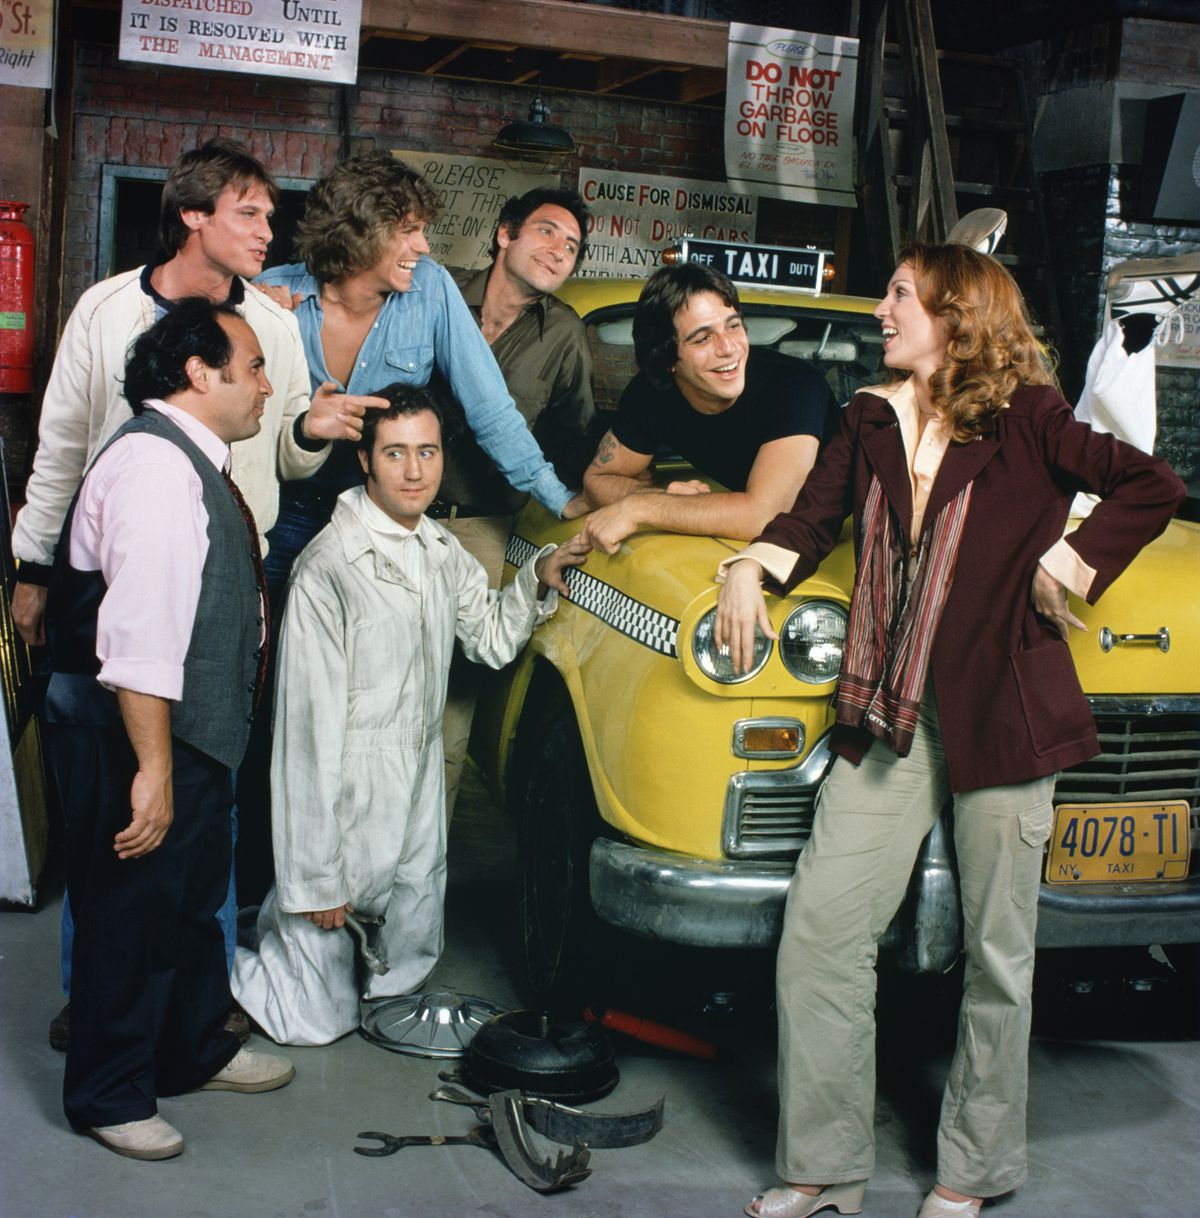 The cast of Taxi laugh in front of a taxi cab, with tools on the ground in front of it.